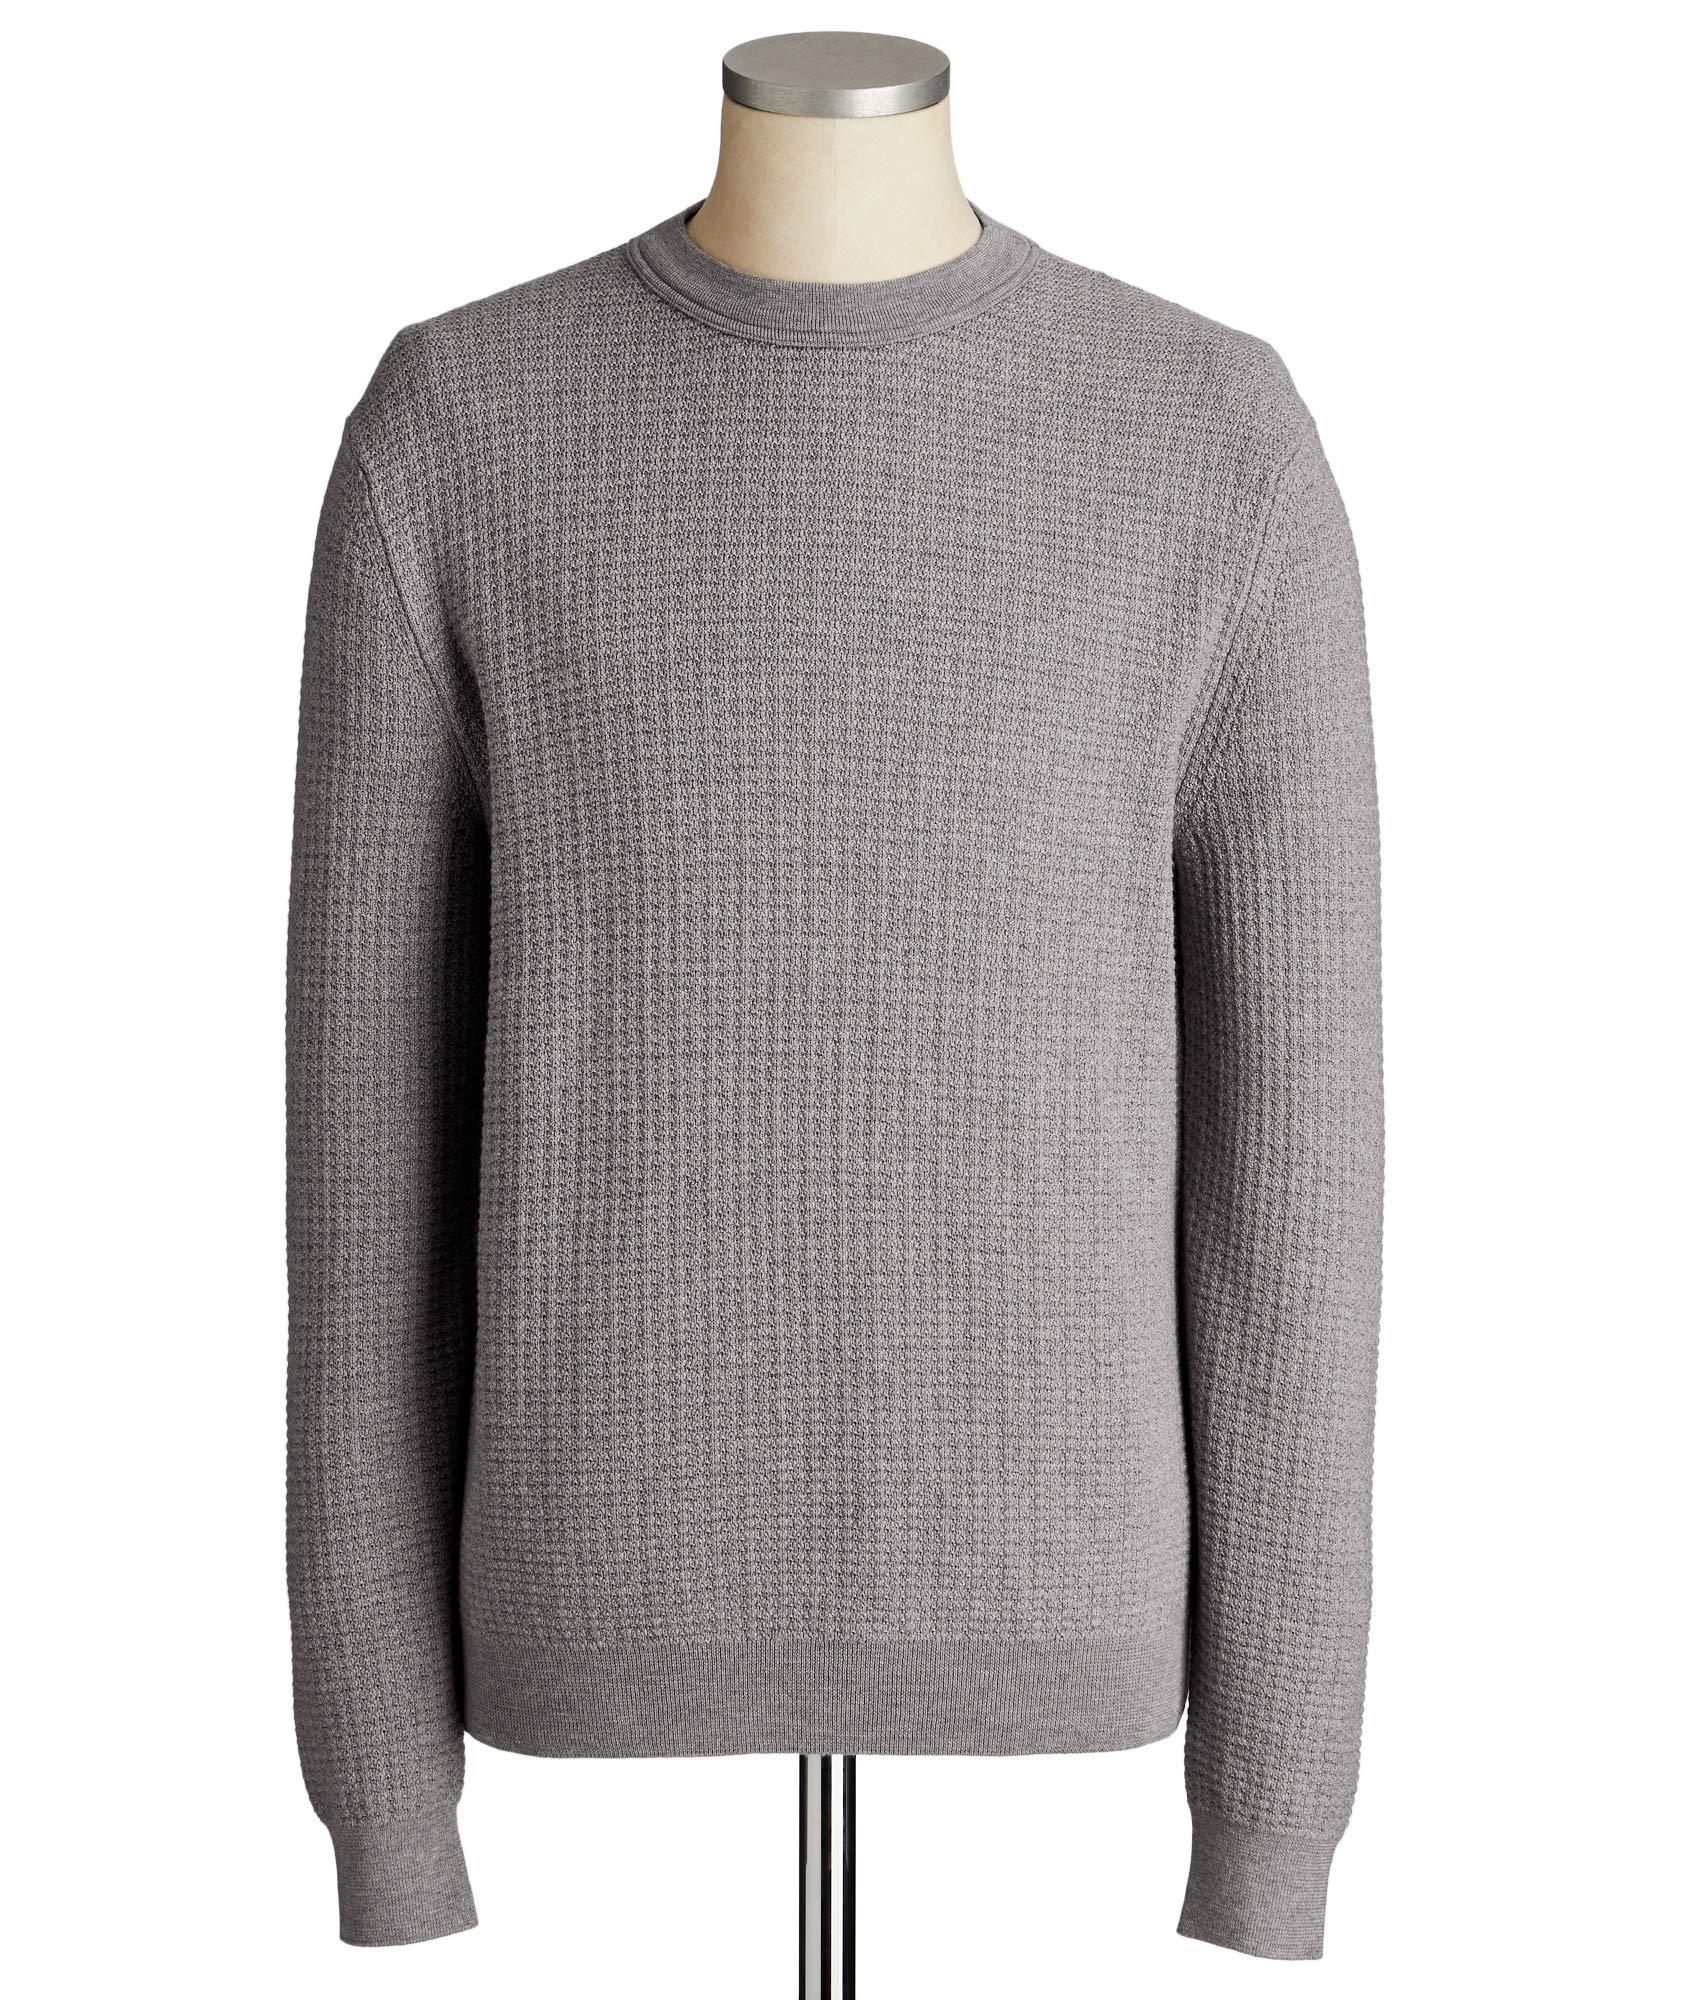 Wool-Cashmere Sweater image 0